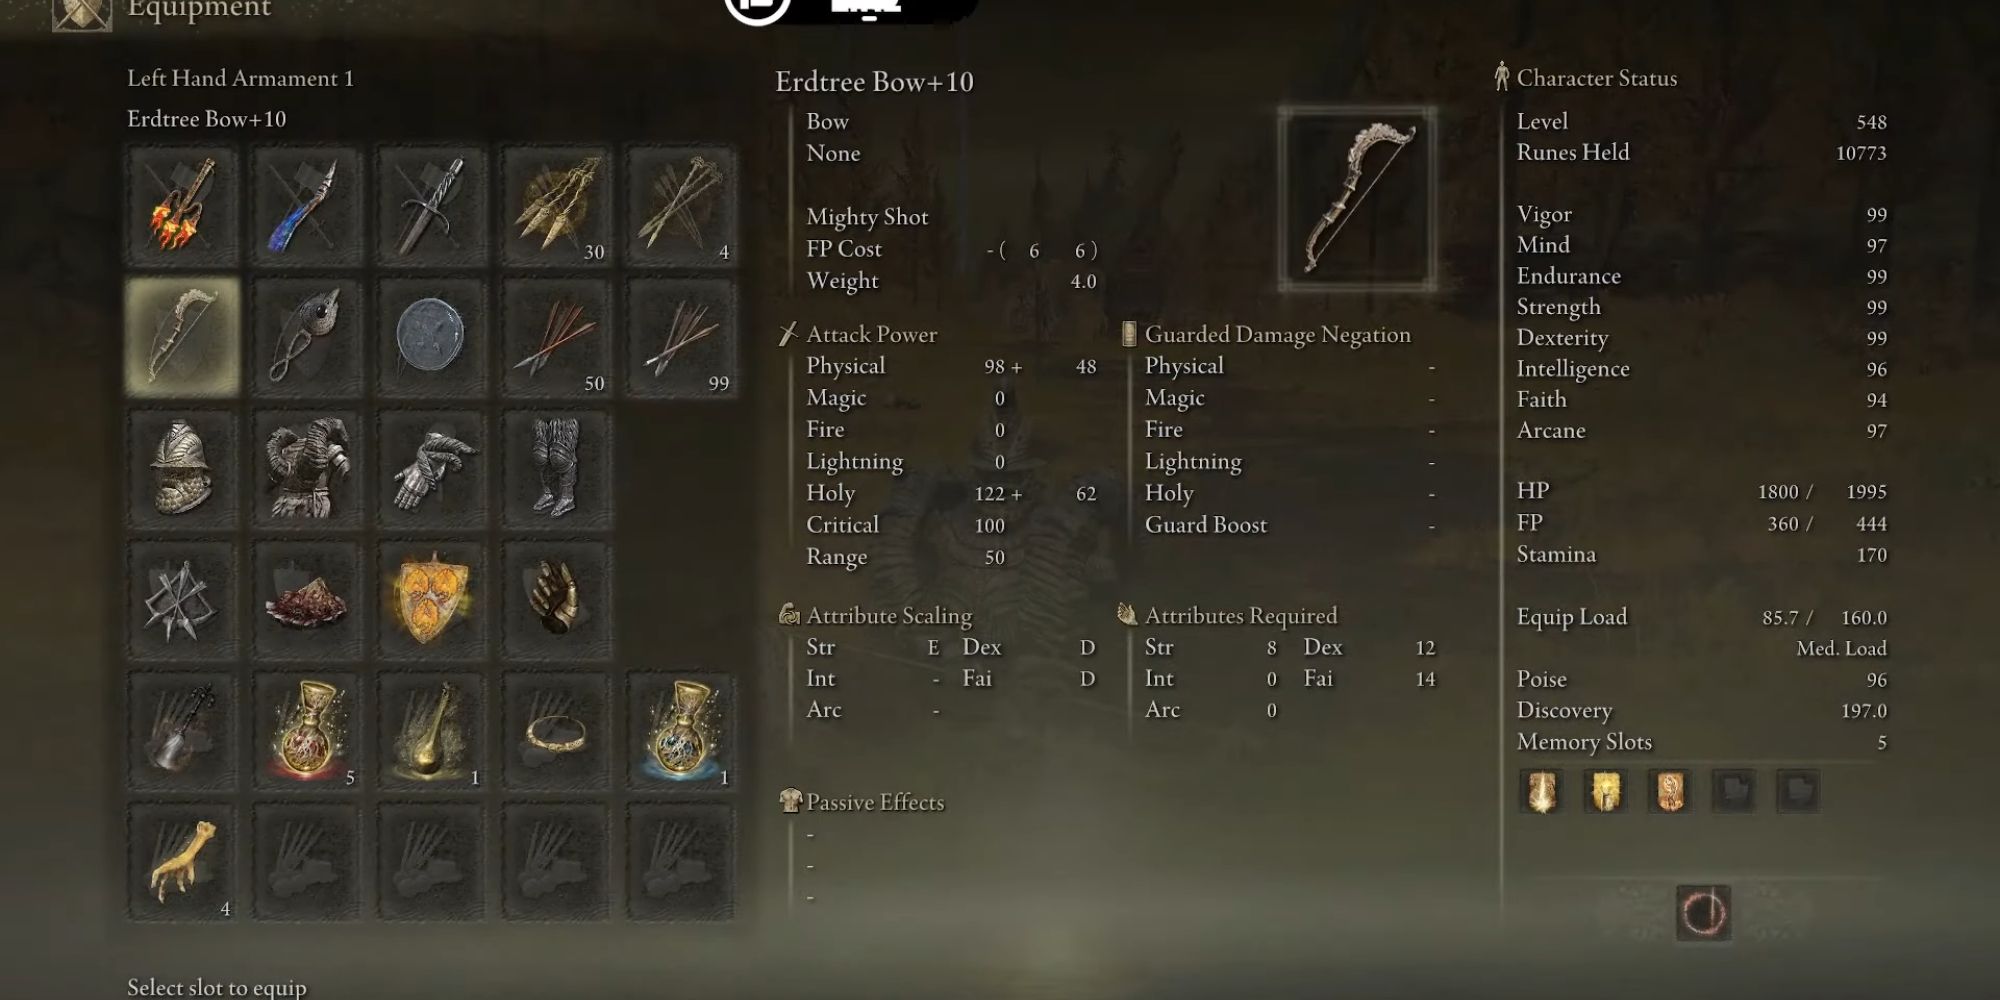 Erdtree Bow in an elden ring players inventory